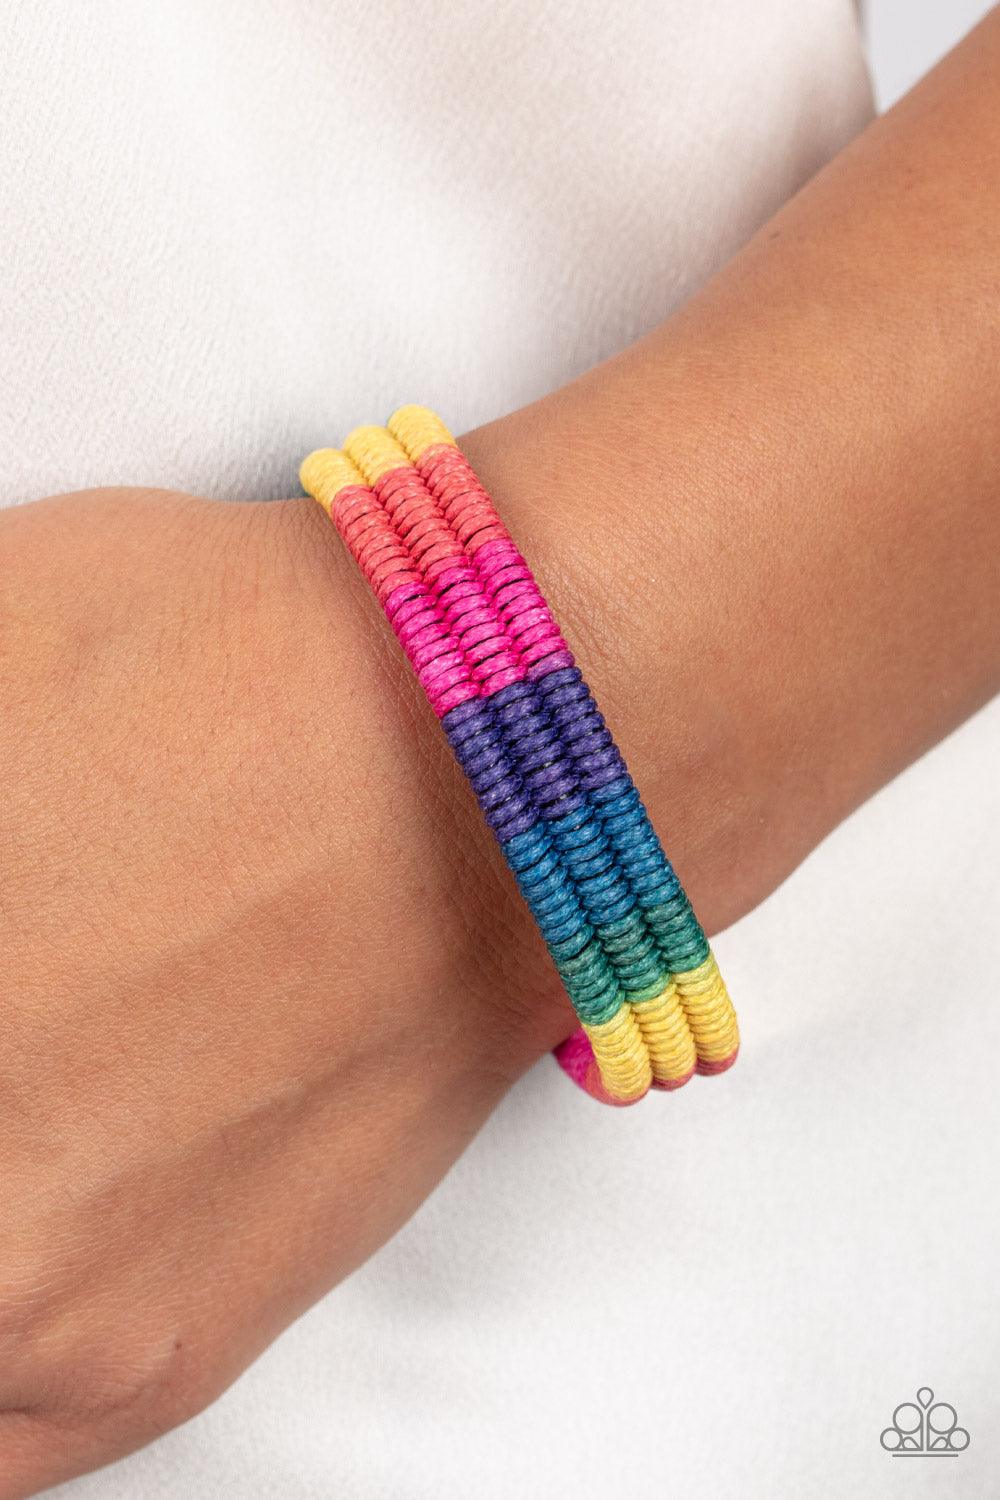 Paparazzi Accessories Rainbow Renegade - Multi Colorful sections of pink, red, yellow, green, blue, and purple cords ornately wrap and weave around three black bands, coalescing into a radiant rainbow around the wrist. Features an adjustable sliding knot